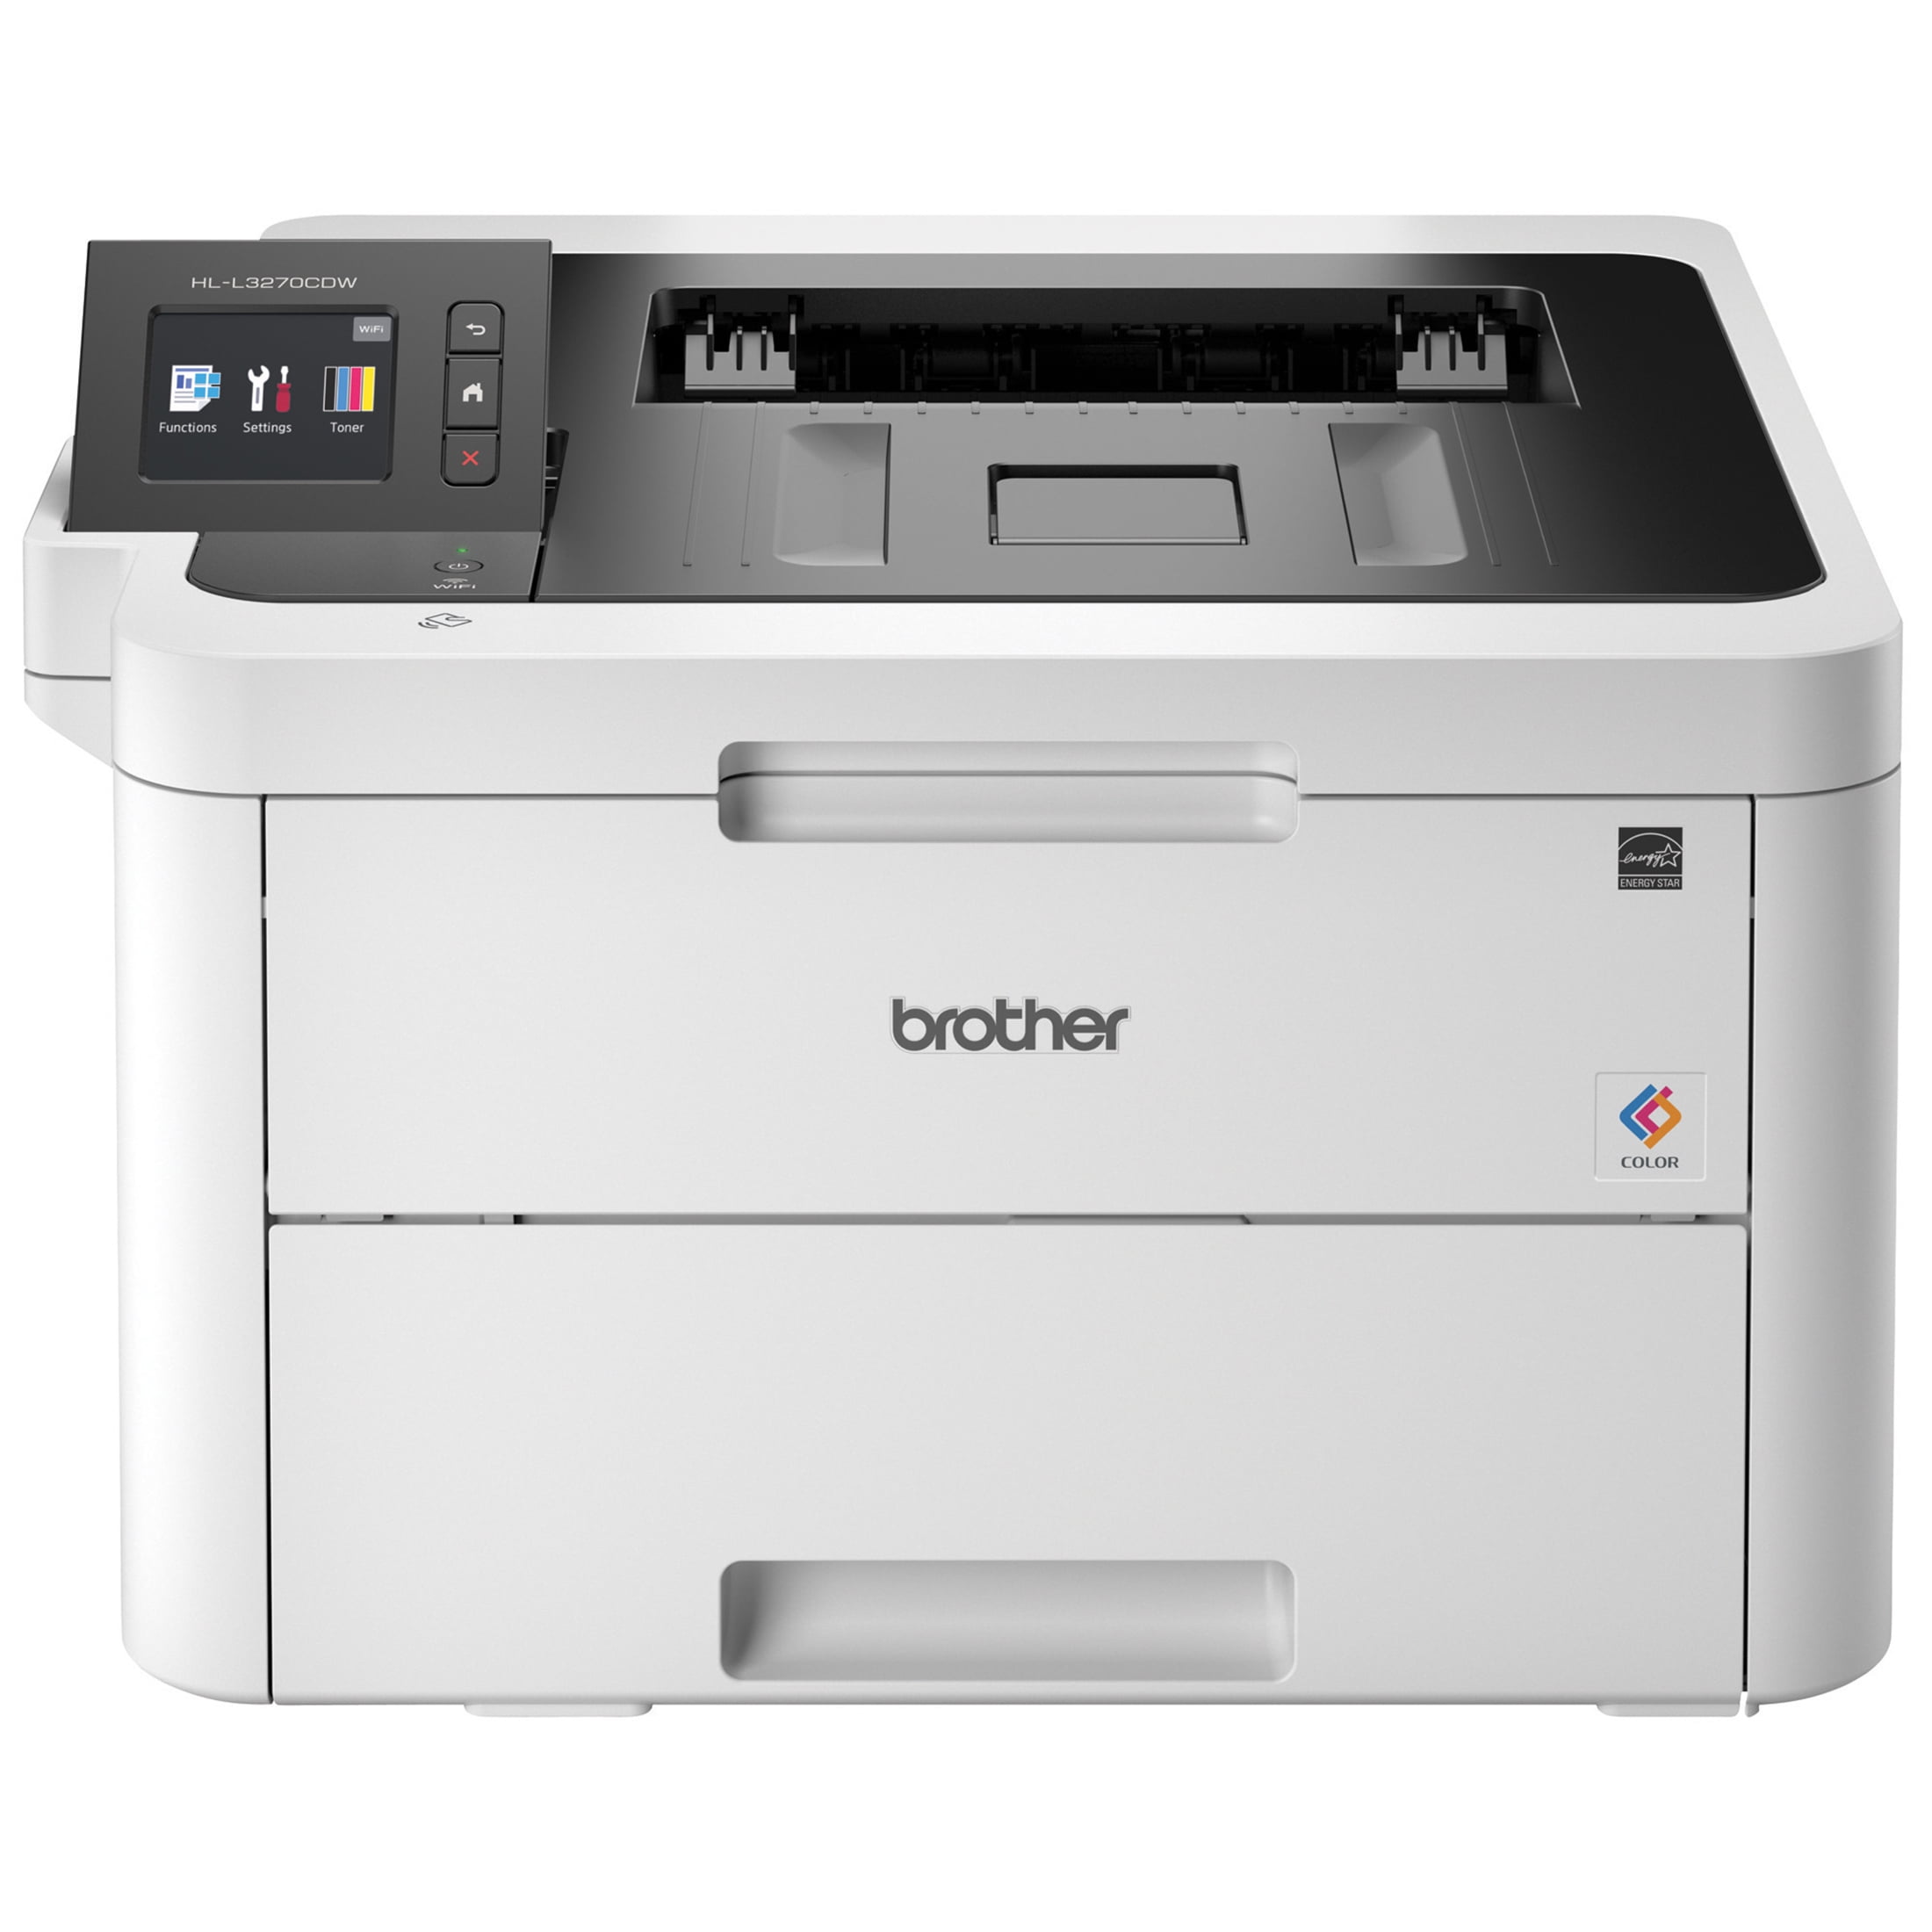 Brother HL-L3270CDW Compact Digital Printer with NFC, Wireless and Duplex Printing - Walmart.com